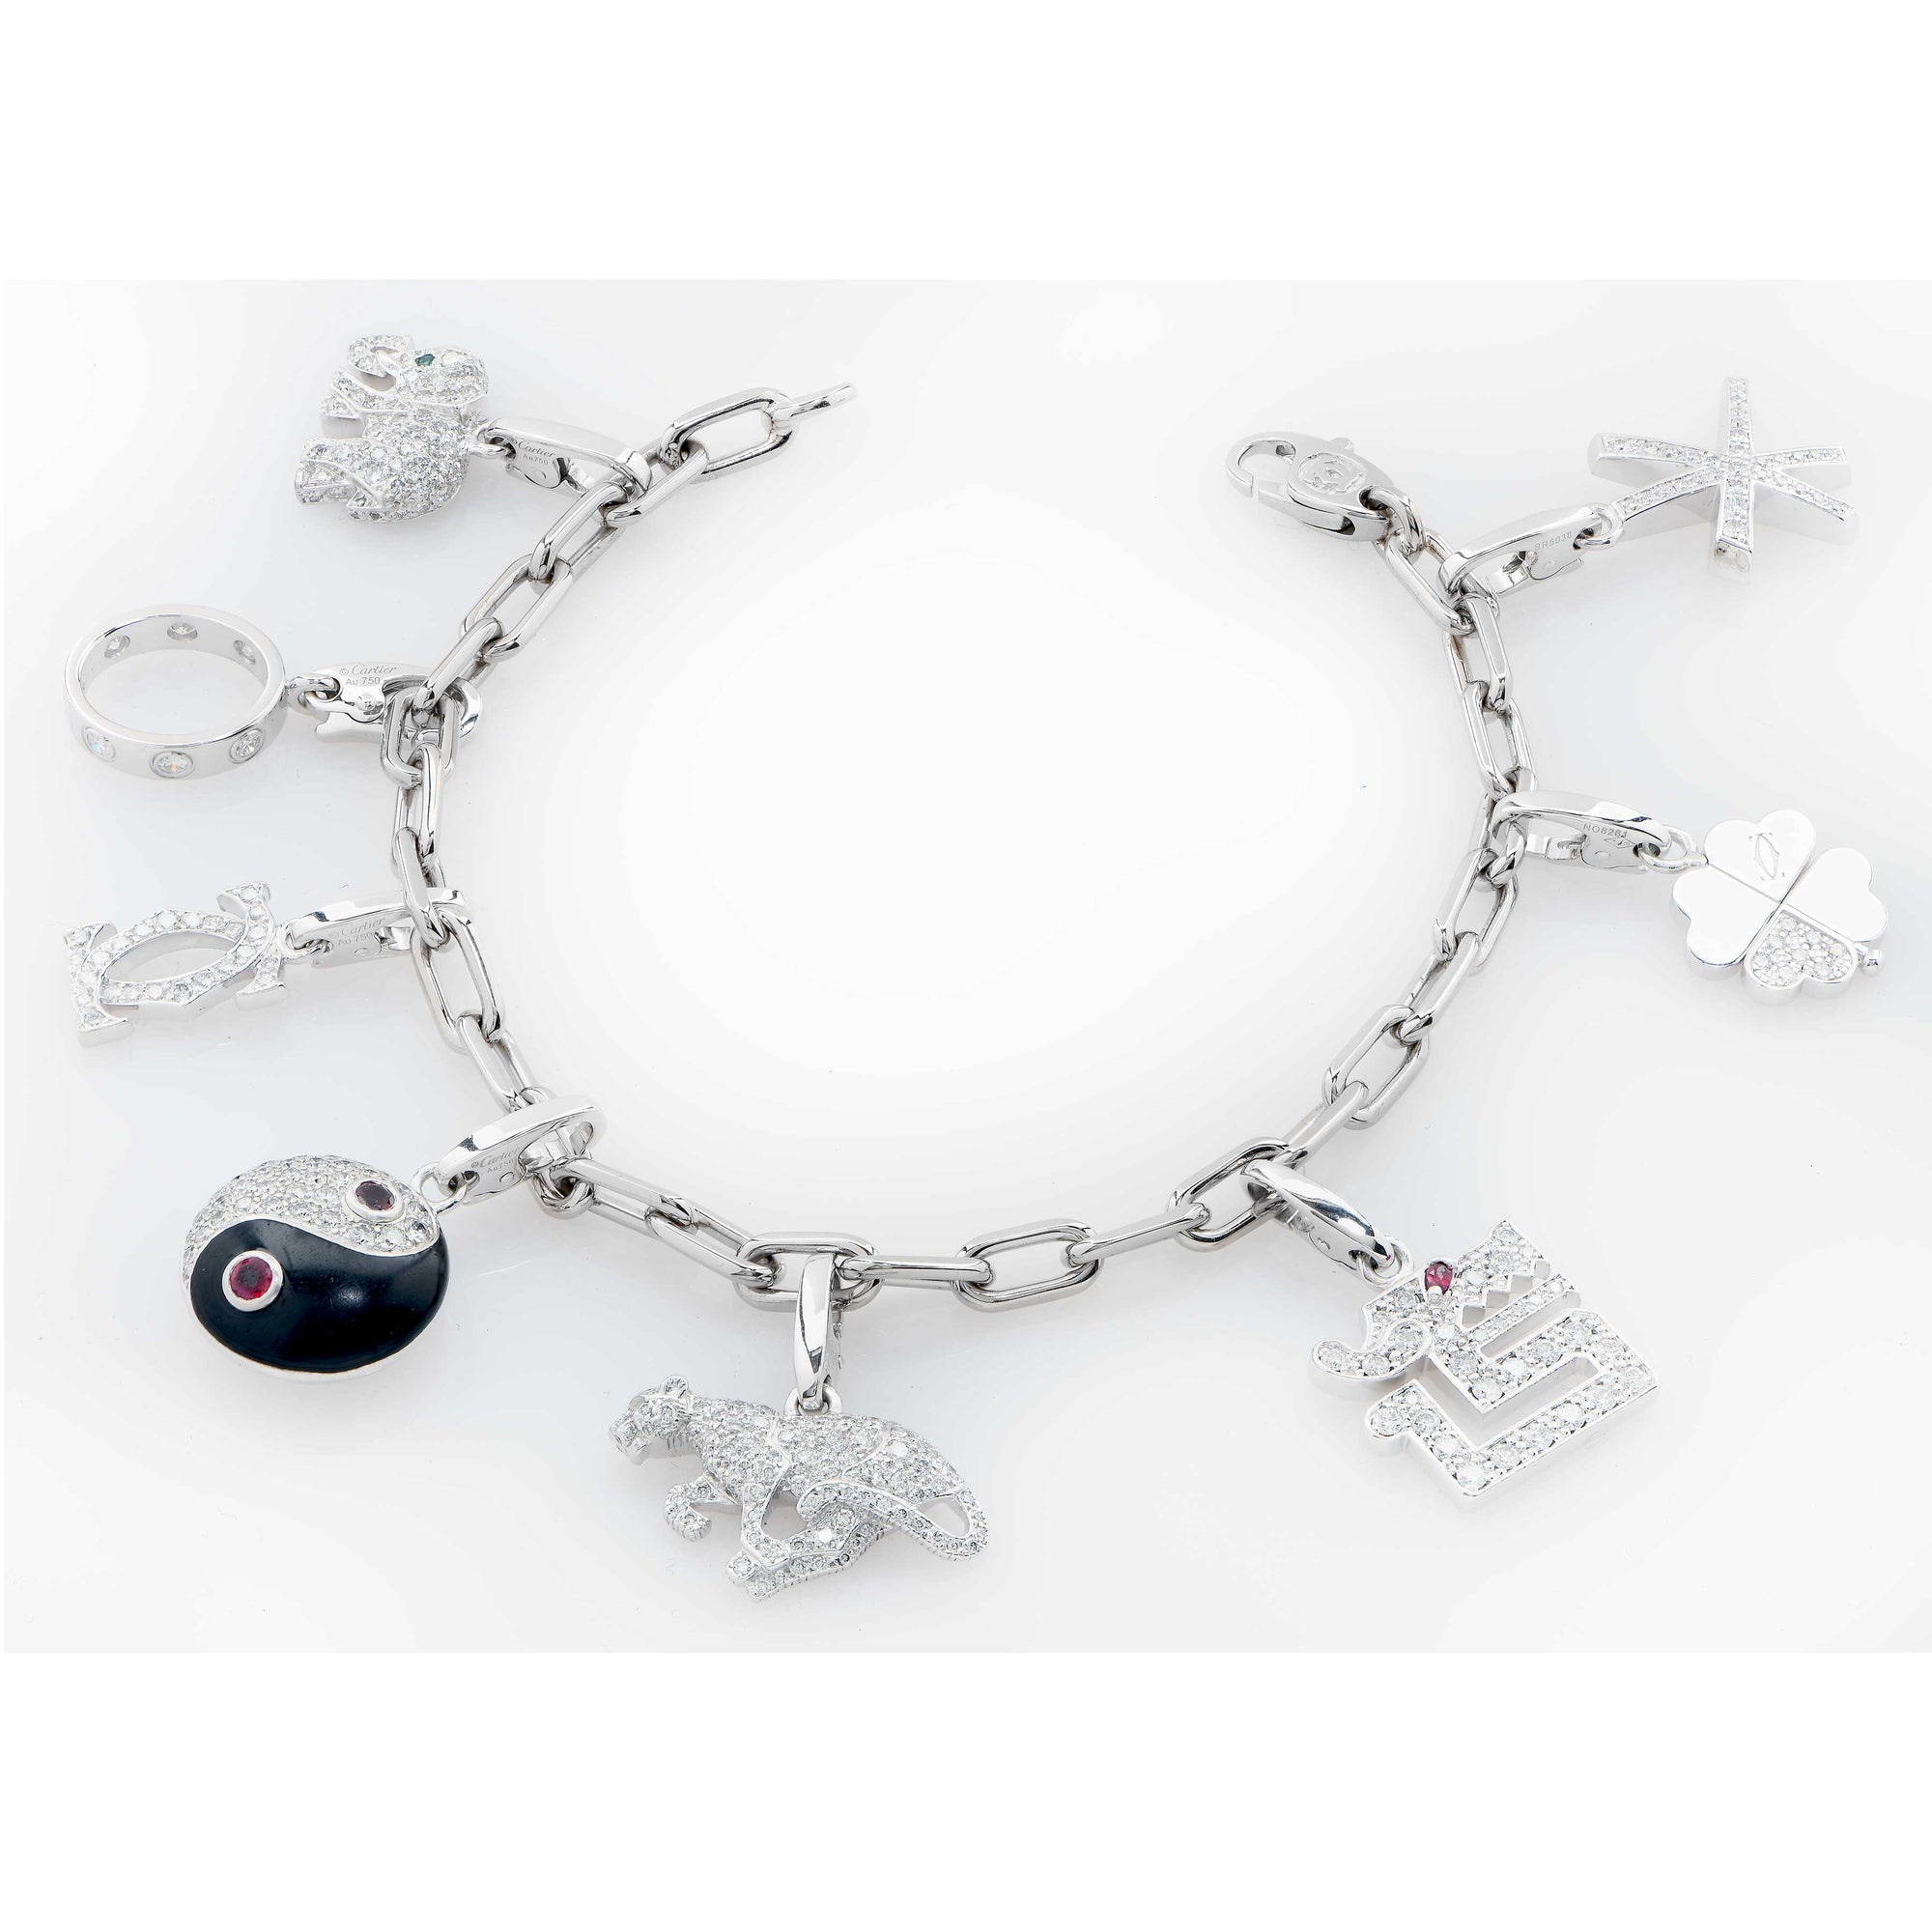 Cartier Charm Bracelet in 18 Karat White Gold With 8 Charms